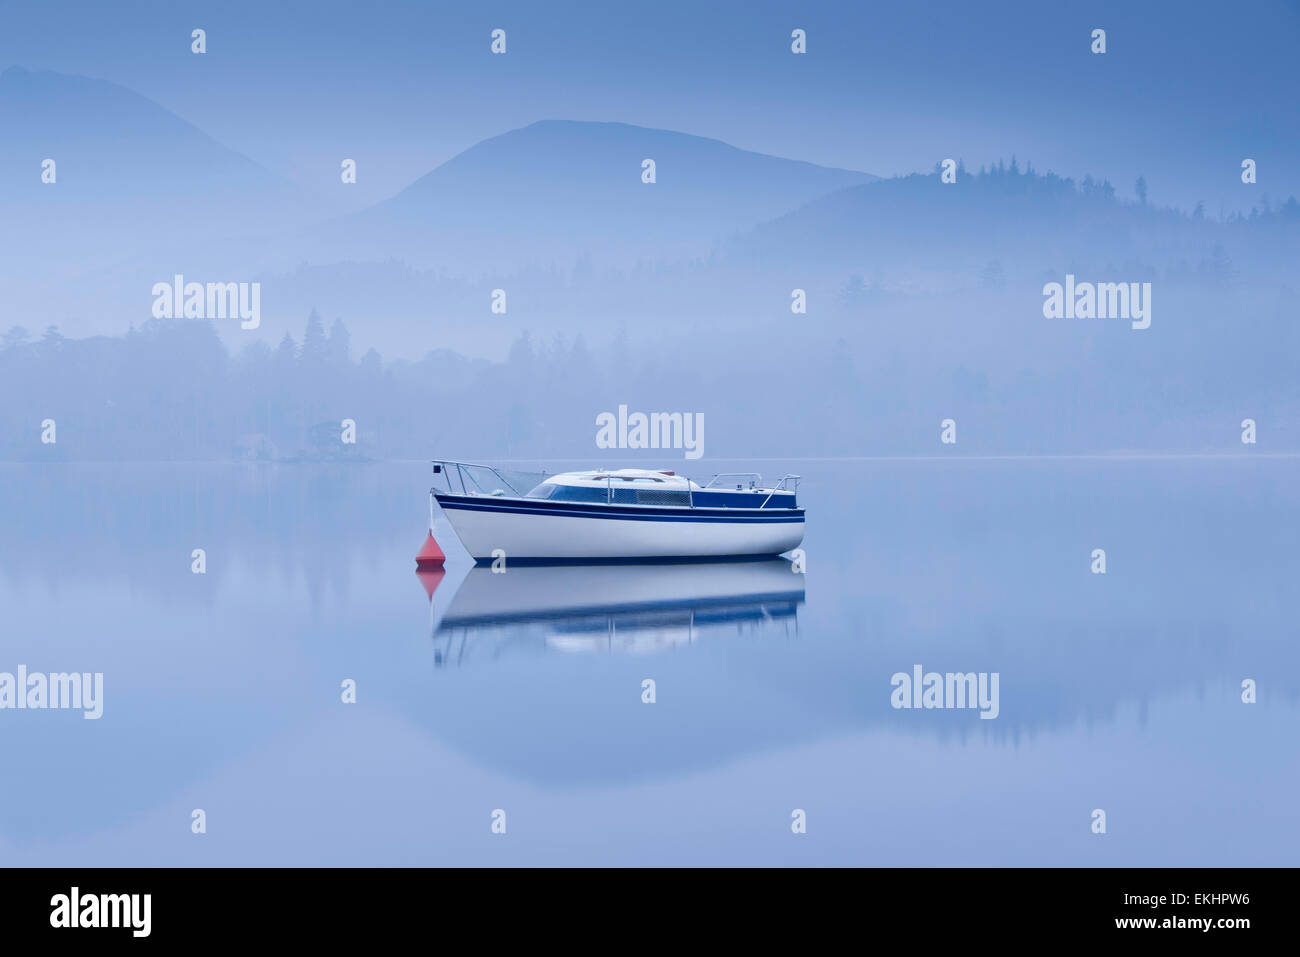 Boat on an early morning misty Derwentwater, Lake District, England Stock Photo